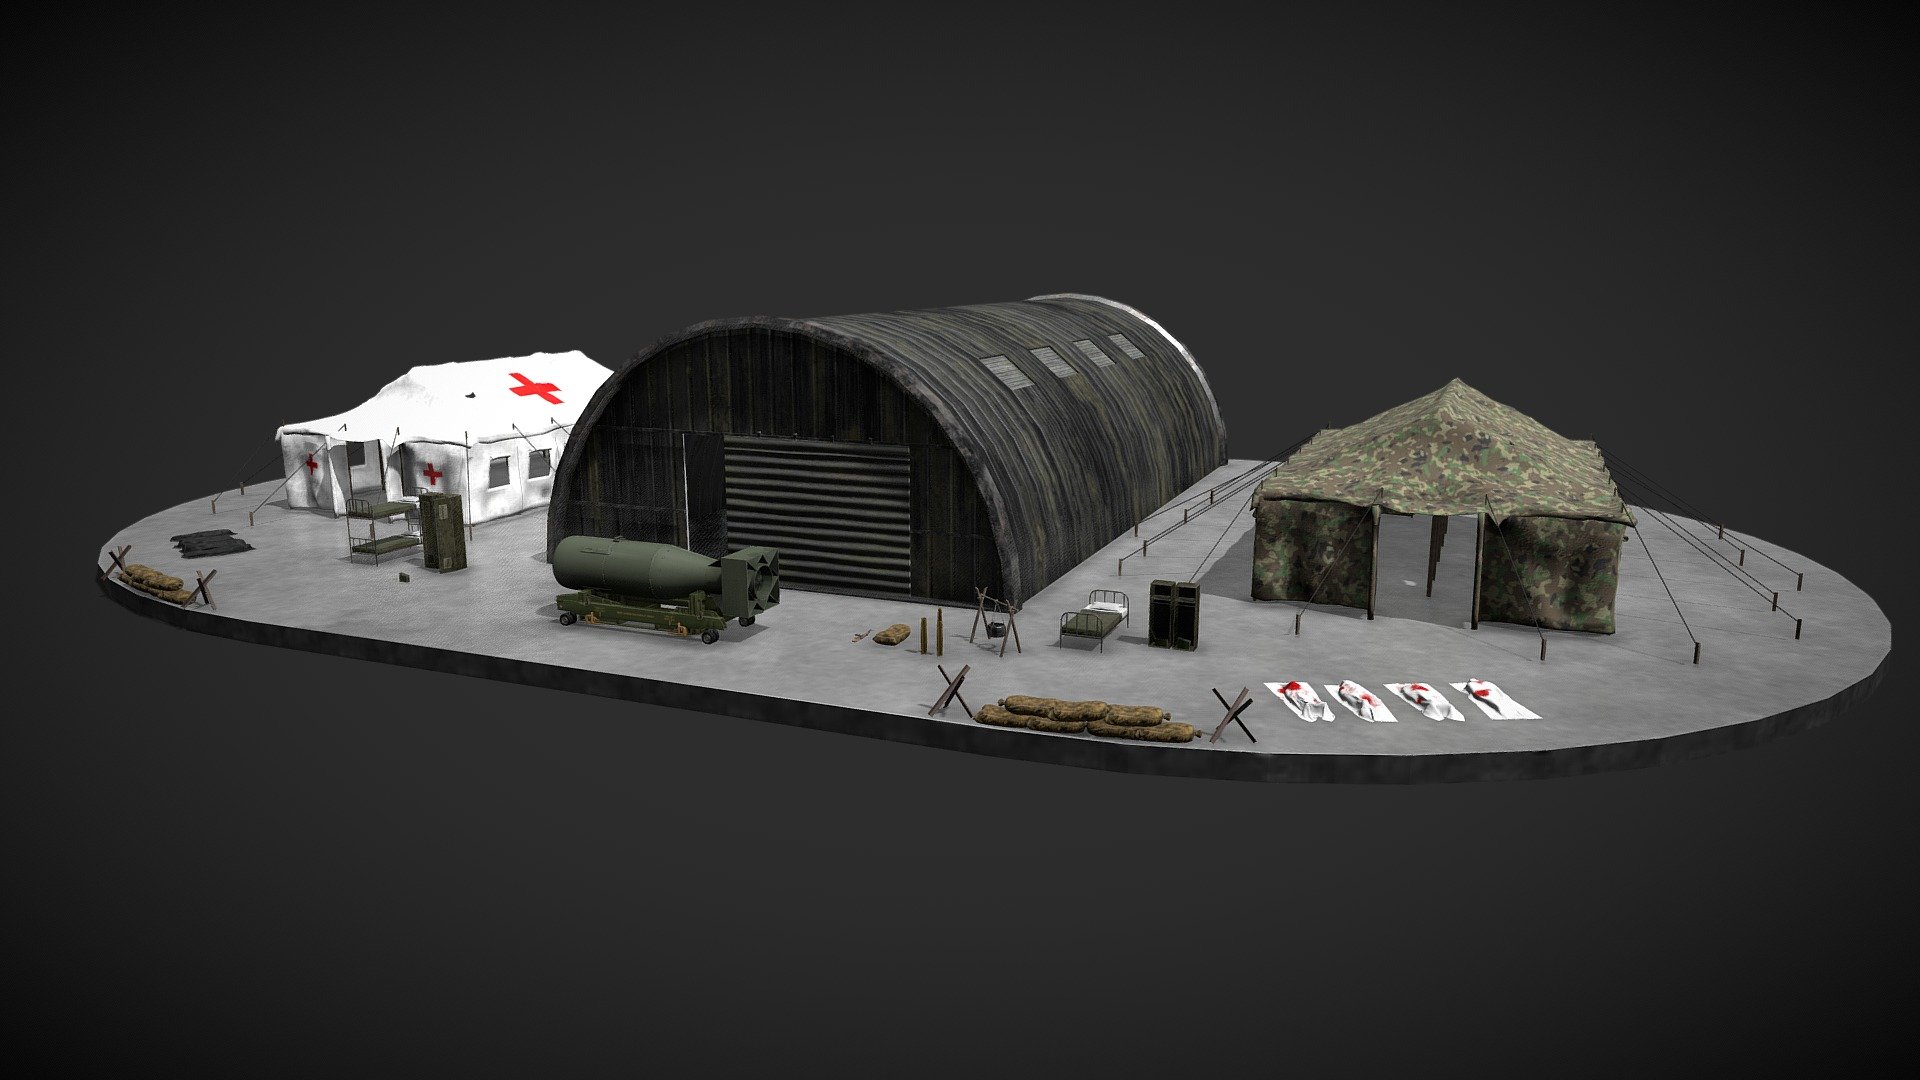 Military base pack containing 24 different meshes.
(15) 2k PBR texture sets total.
You can download some of the assets in lower quality for free from my sketchfab page (Little boy, Ammobox, Ak47, Chained Cauldron) .
Mesh listing:
* Ak-47
* Ammuntion Box
* Army Bunk and Single Bed
* Metal Storage Cabinet
* Sheet covered bodies x4
* Bag covered bodies x4
* 7.62mm Bullet and Casing
* Survival Chained Cauldron
* Little Boy Atomic Bomb
* Medical Tent
* Military Hangar
* Military Tent
* Sandbags x2
* Steel Hedgehog
* Warhead Transporter - Military Base Pack - Buy Royalty Free 3D model by Andrej Grave (@andrej.grave) 3d model